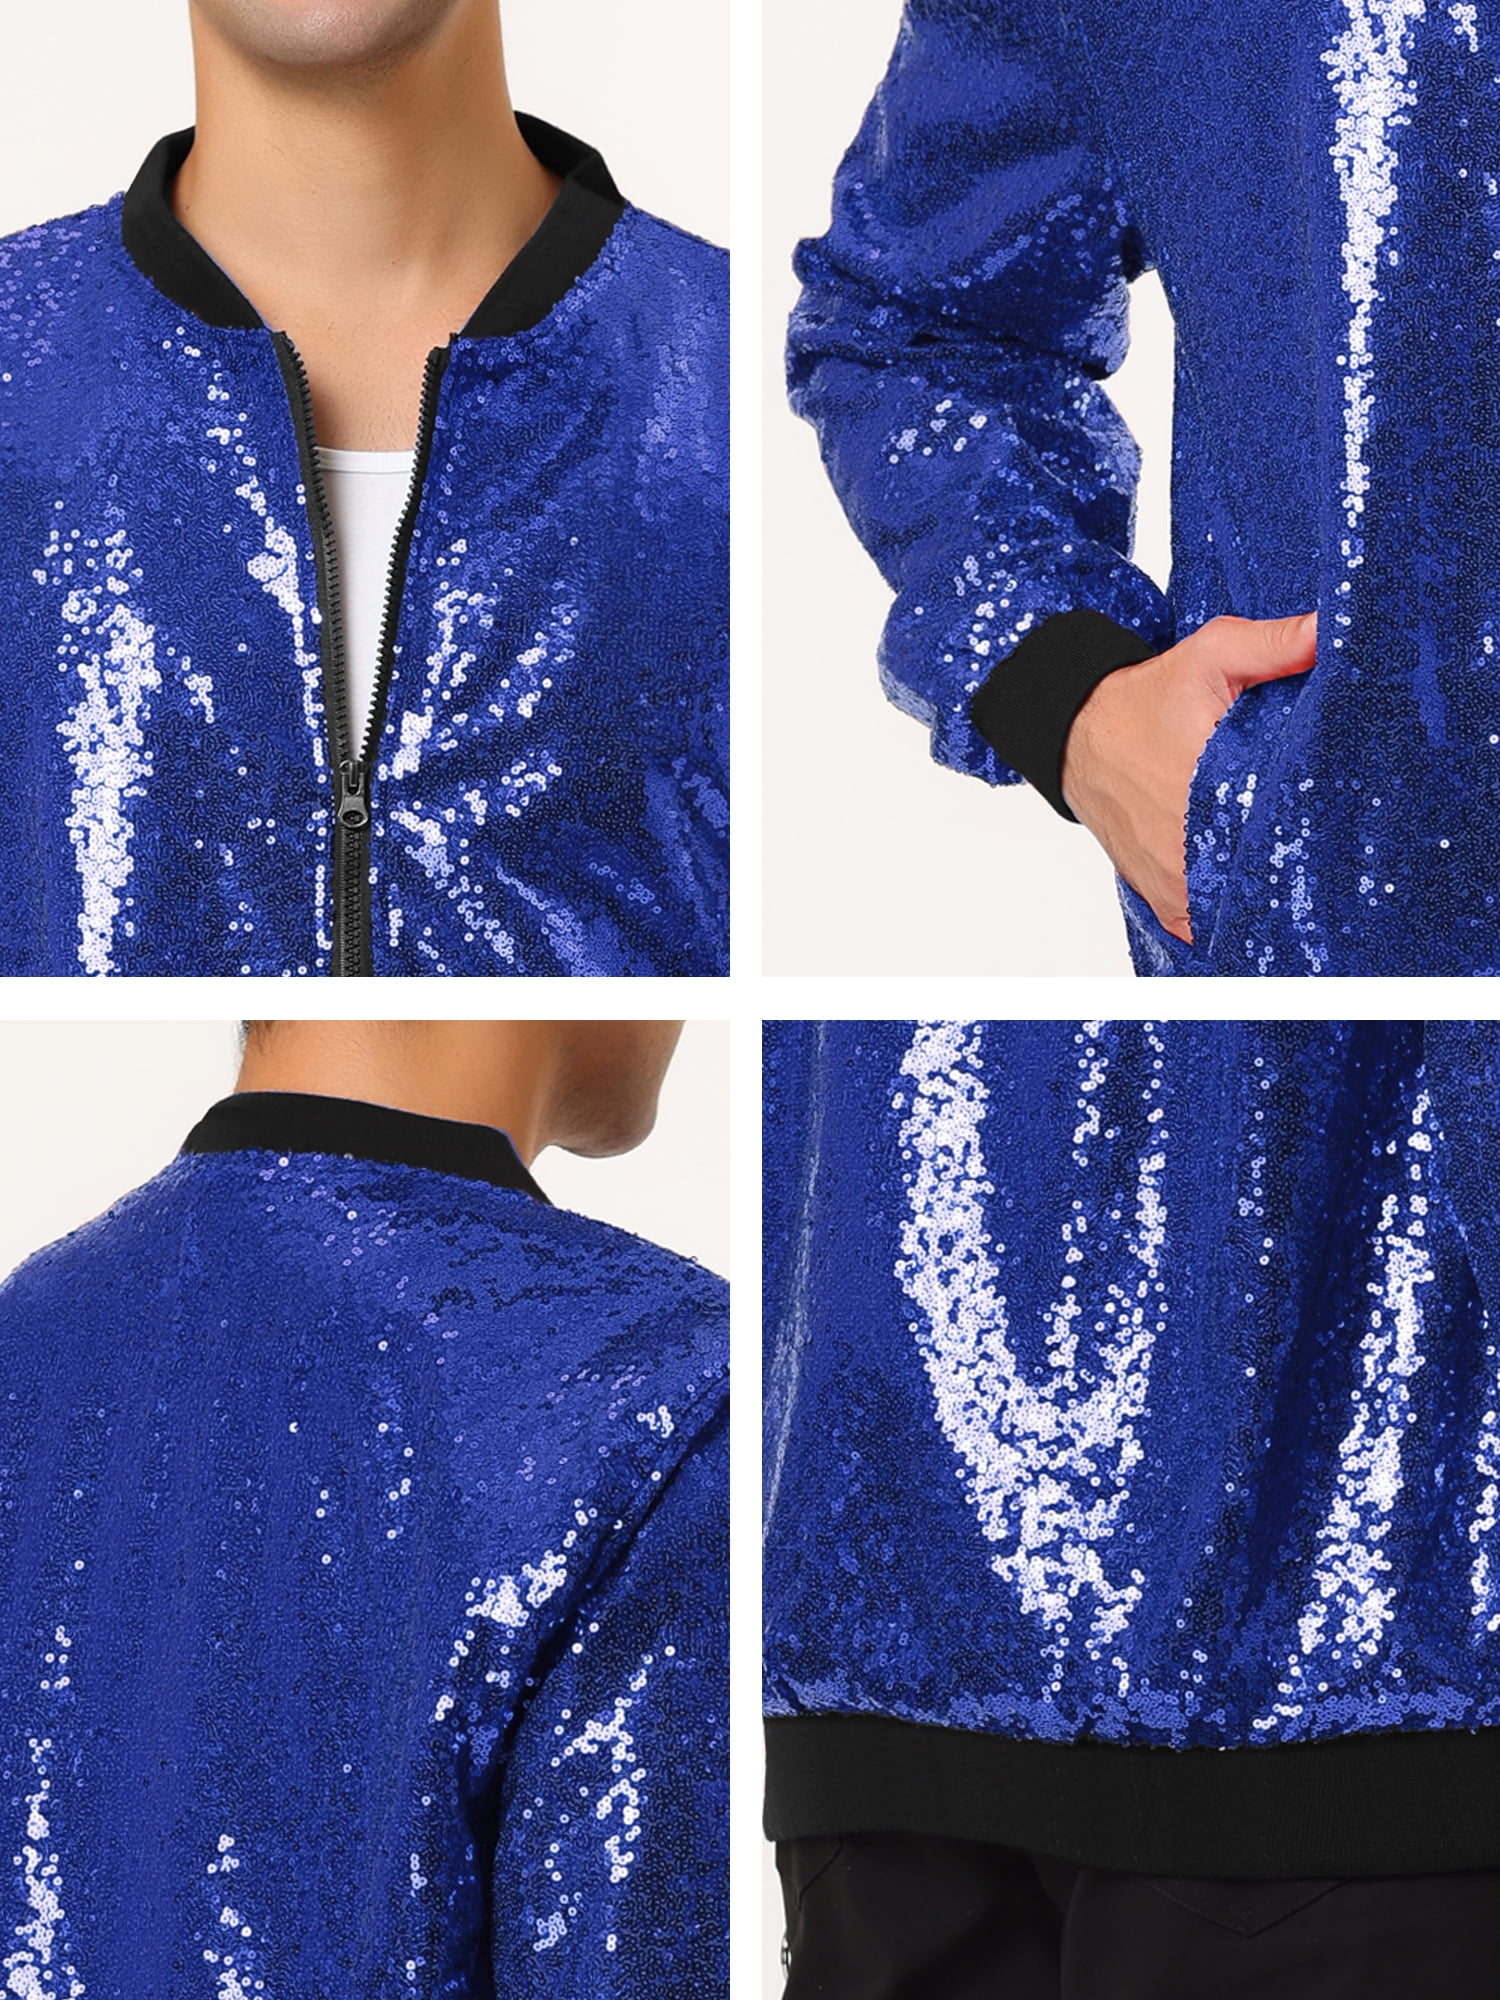 Astros sequined bomber jacket is flying off the shelves at $125 a pop